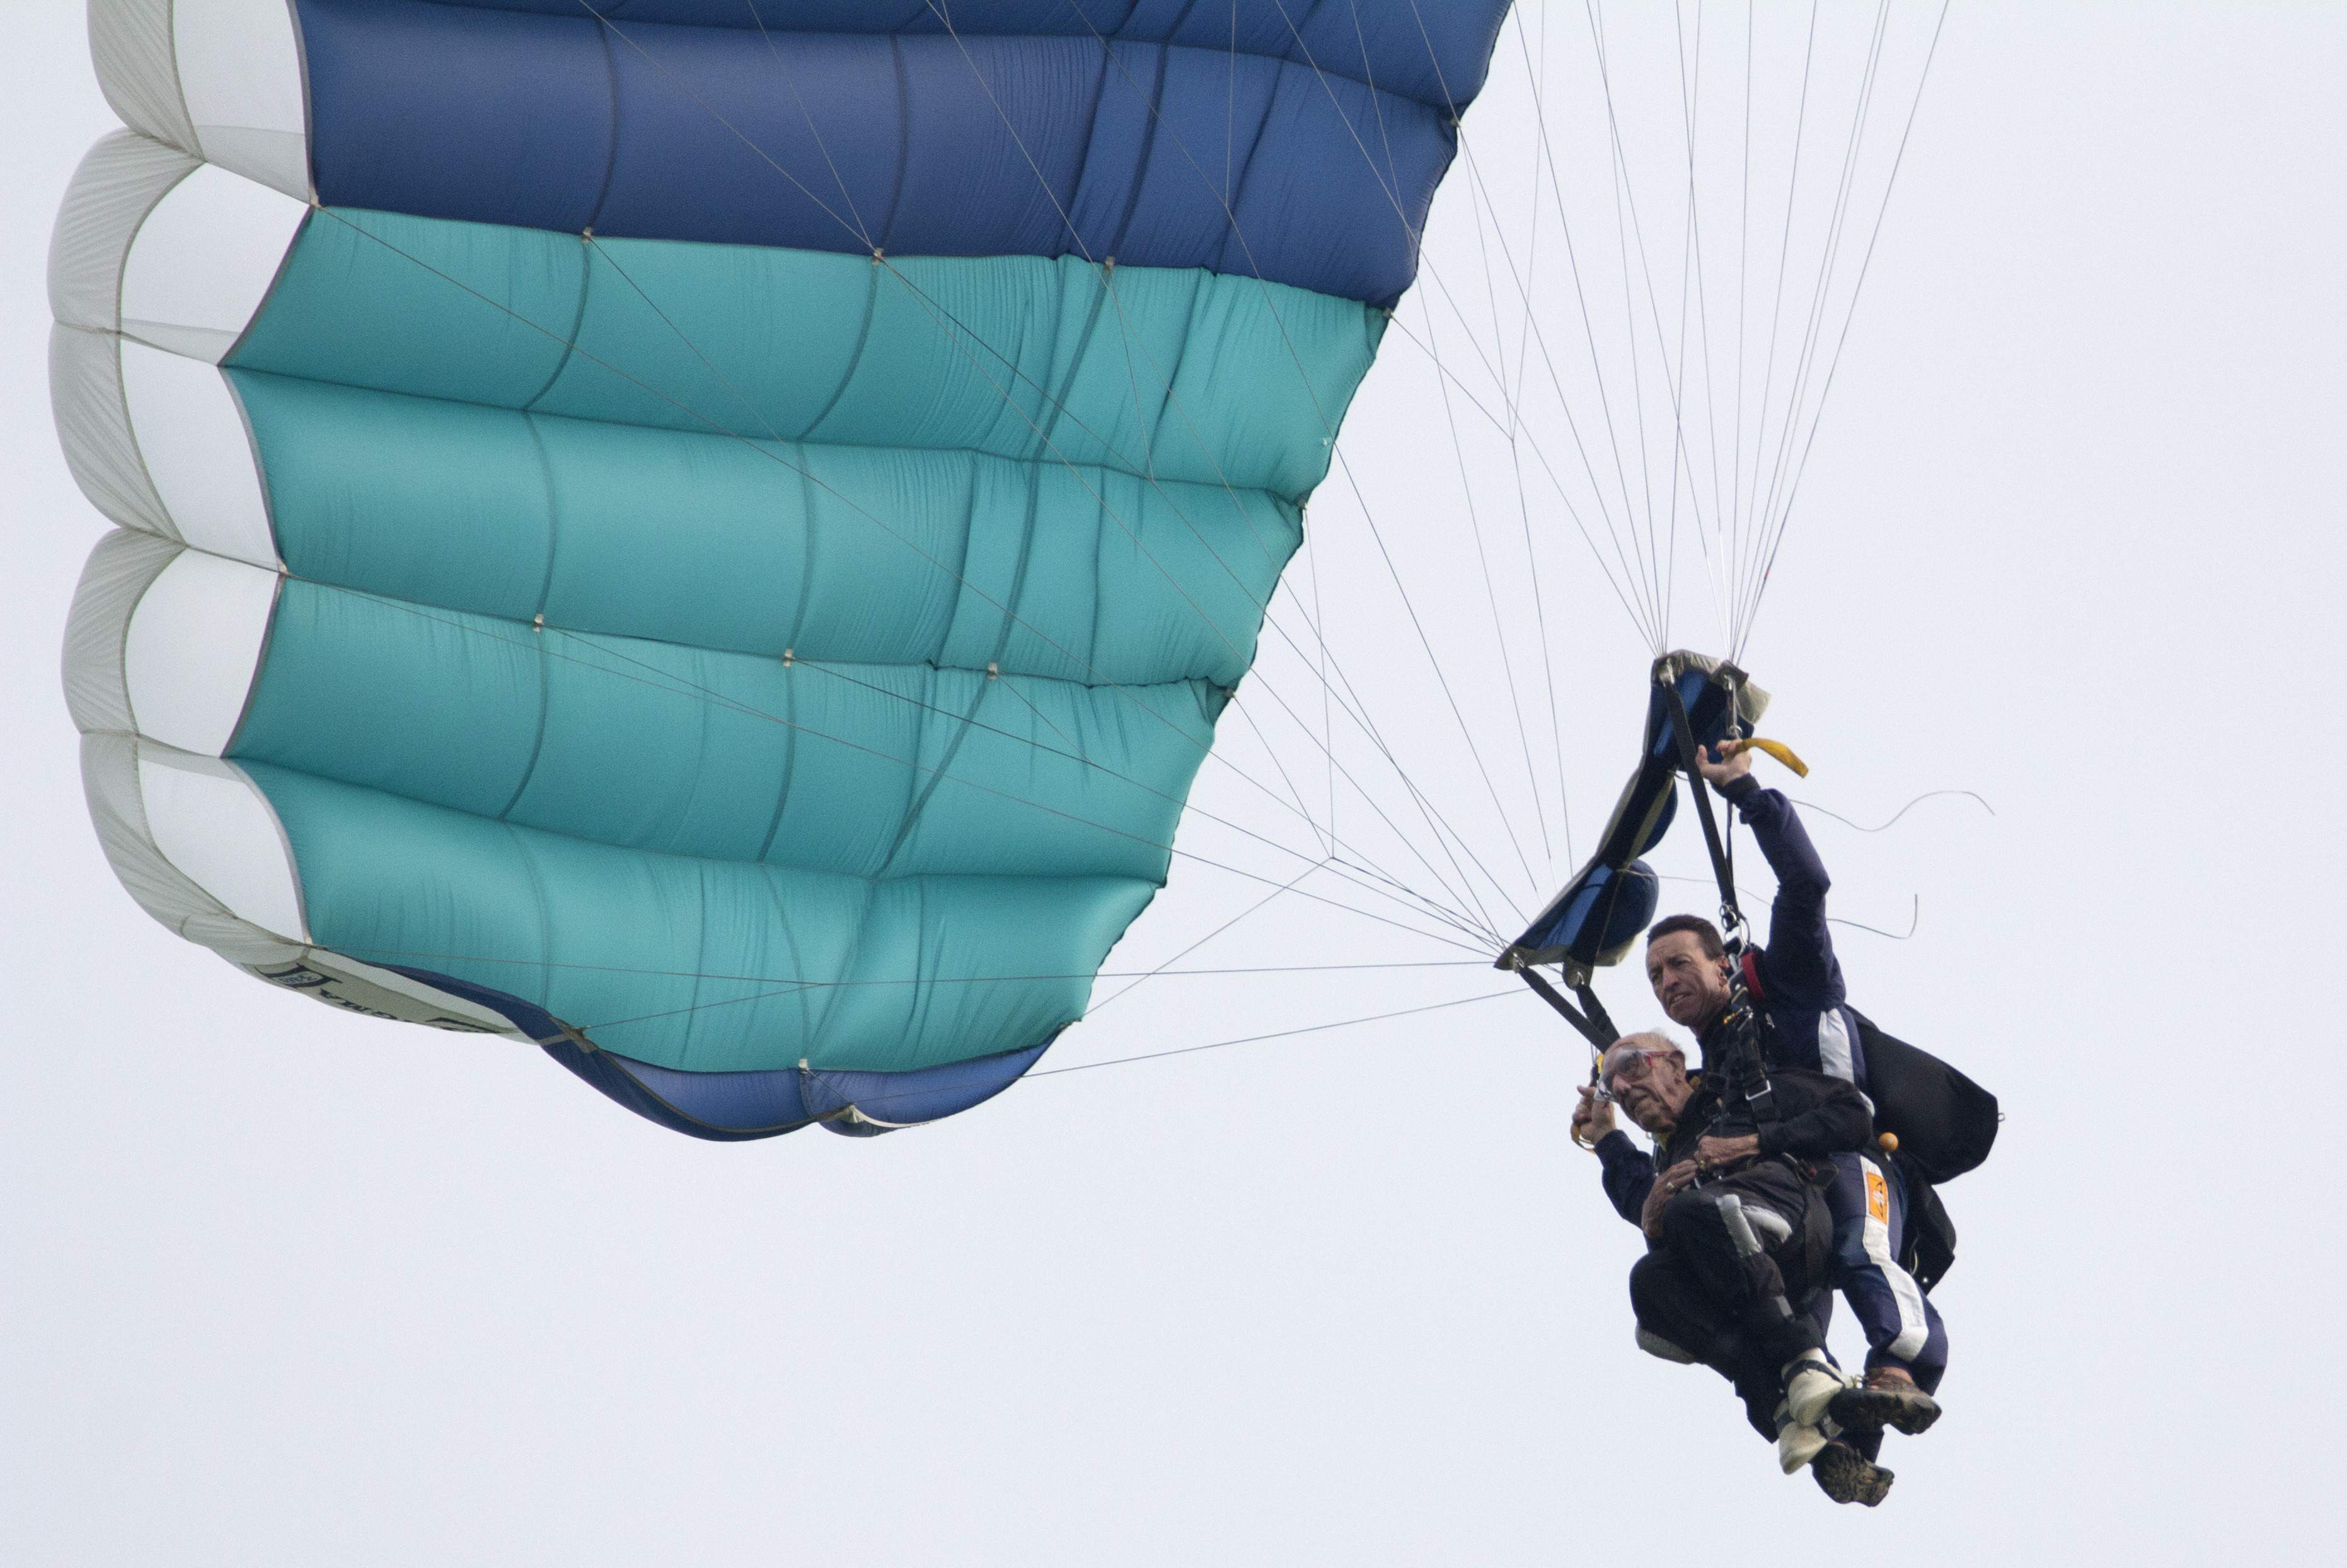 102-year-old breaks skydive record - New Jersey Herald -